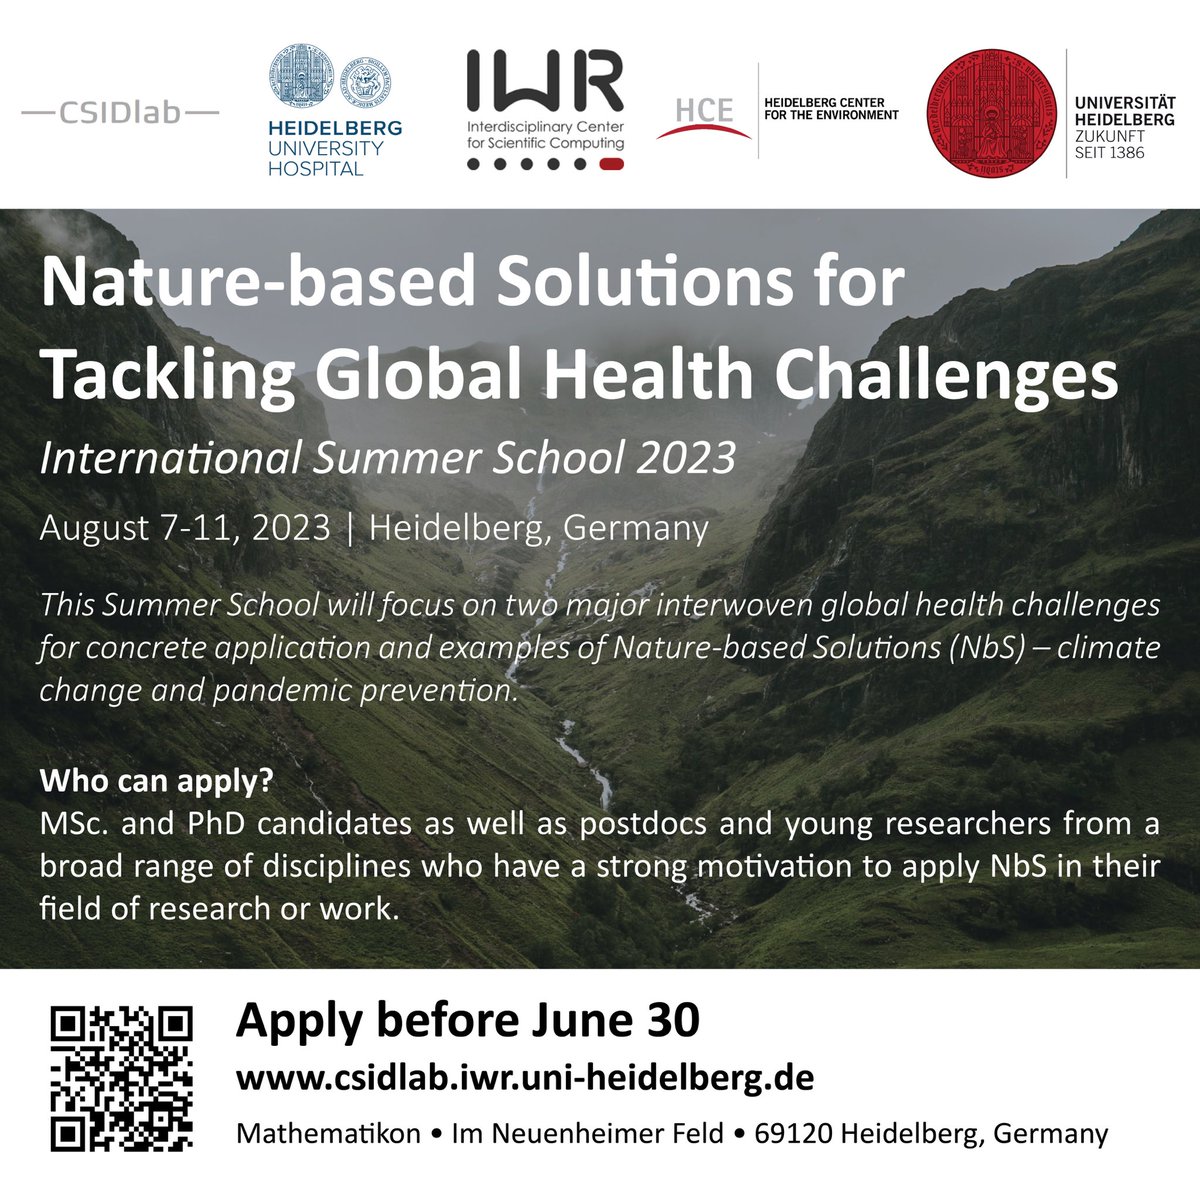 Are you a MSc or PhD student interested in applying #NbS in your field? Come join our #SummerSchool at @UniHeidelberg in August! Apply here ➡️ forms.gle/3H1DYRugnBkZhC…